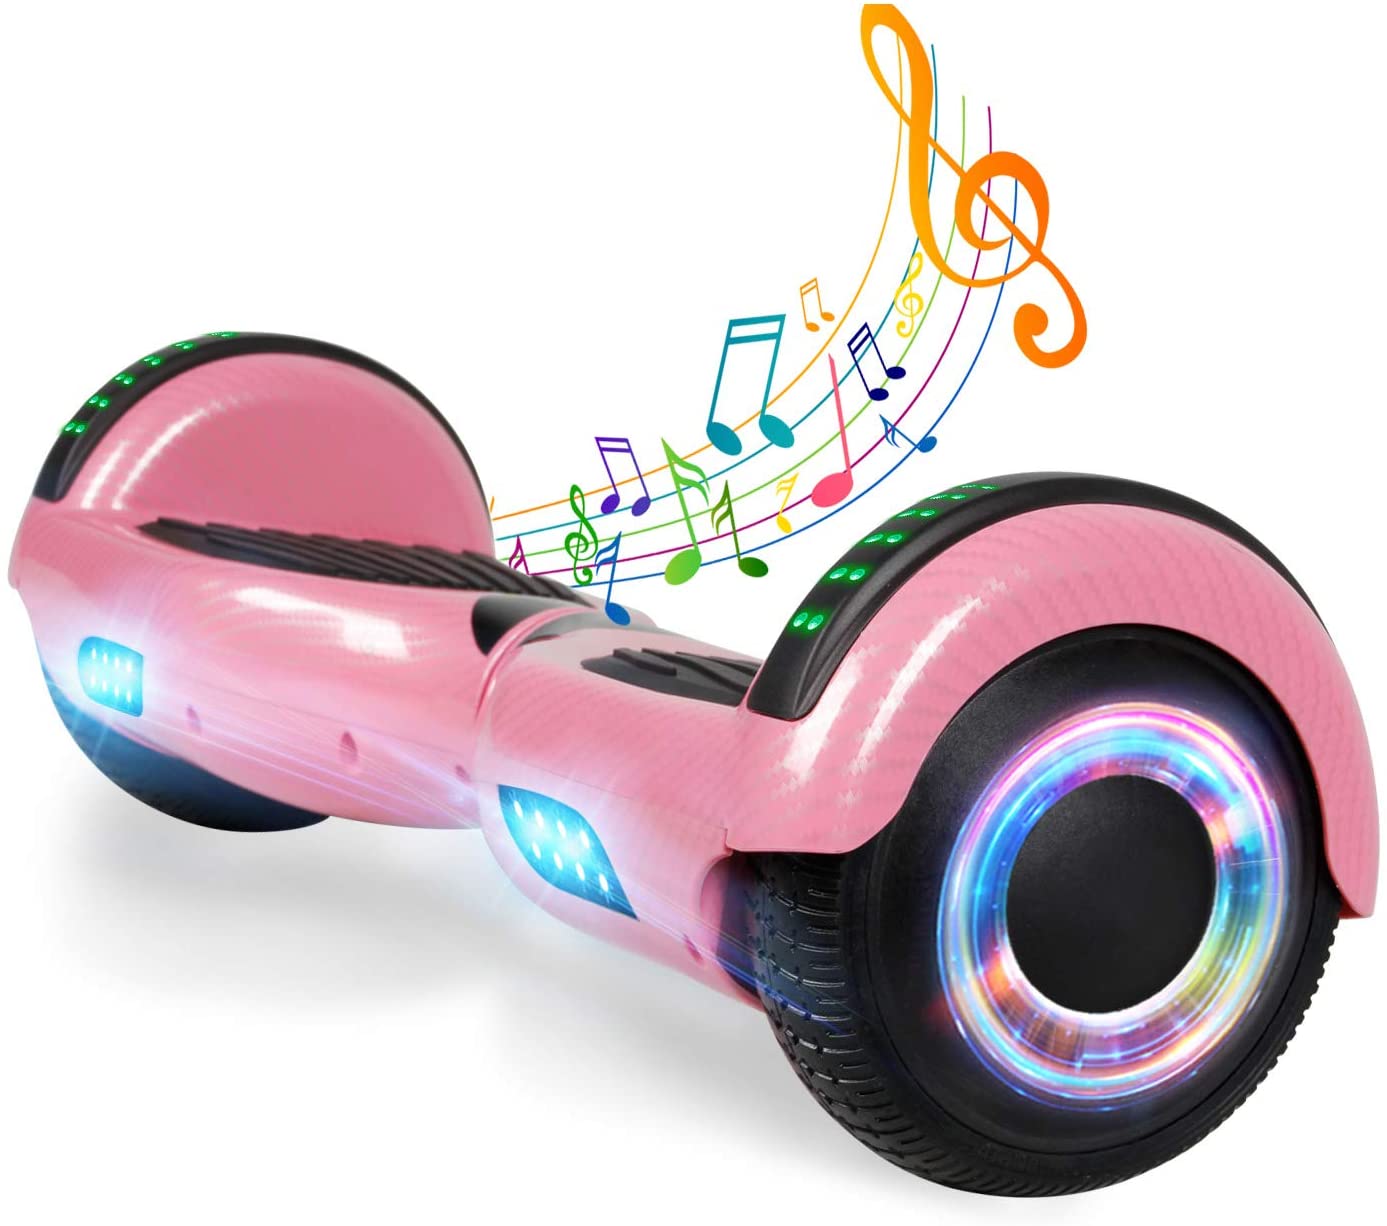 11 Best Hoverboard For Kids (2022 Reviews & Buying Guide) 10